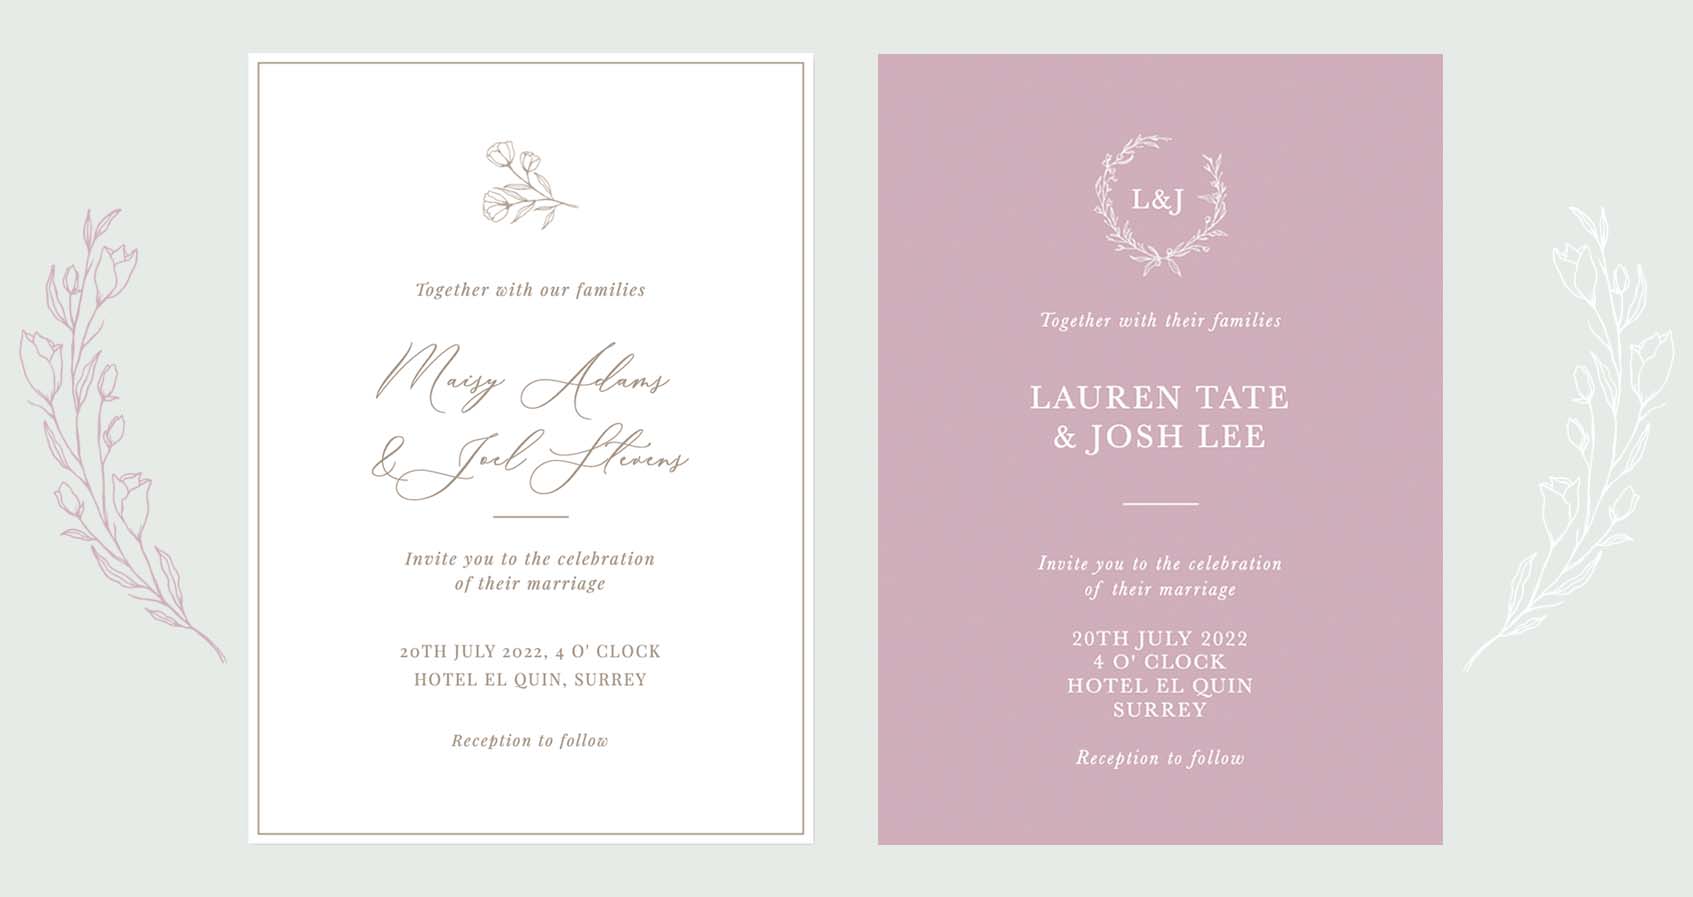 Two elegant style wedding invitations in gold and pink colours